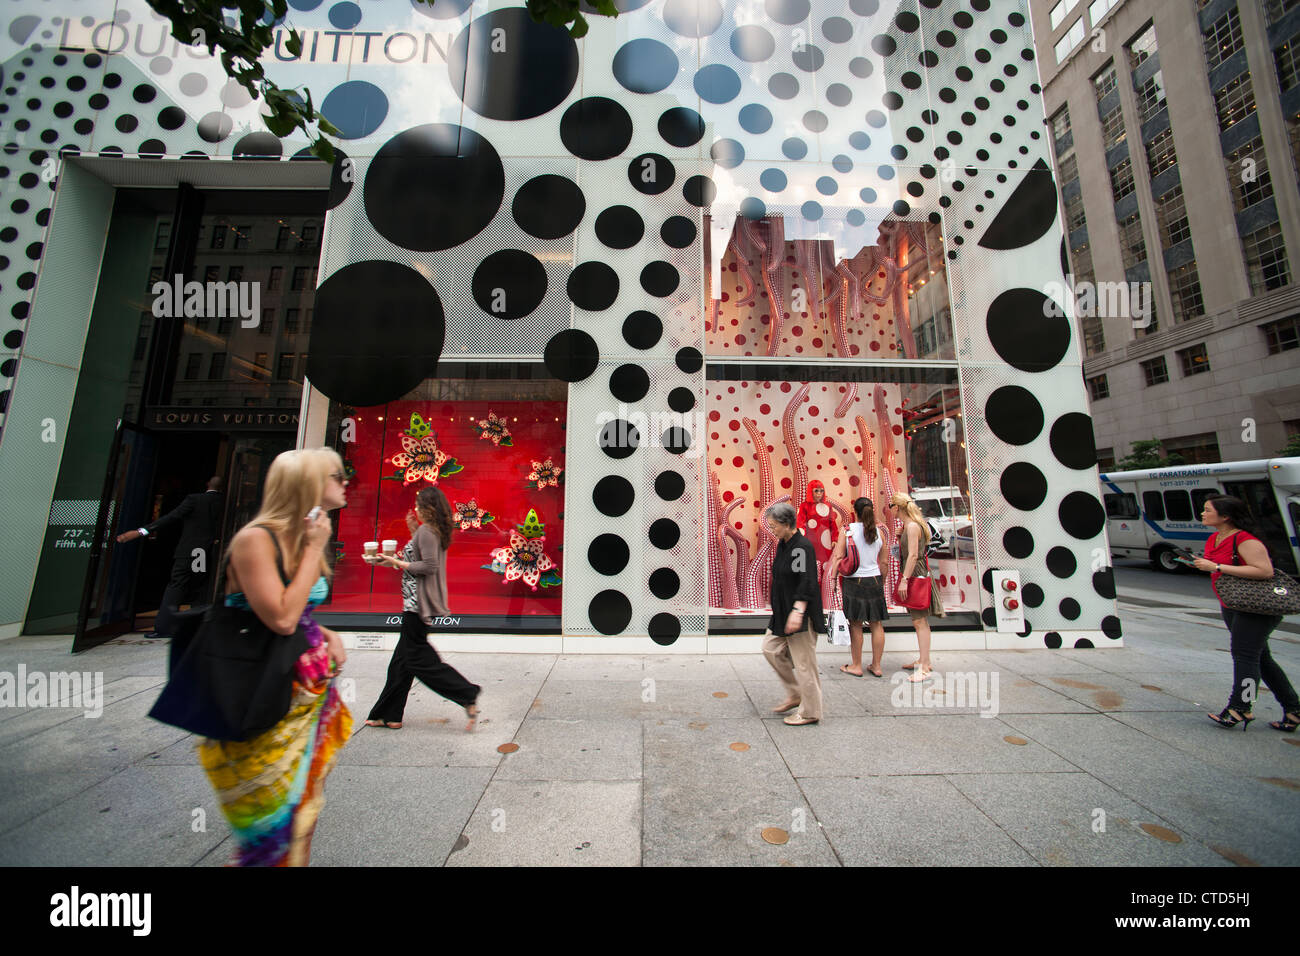 The Louis Vuitton flagship store on Fifth Avenue in New York is